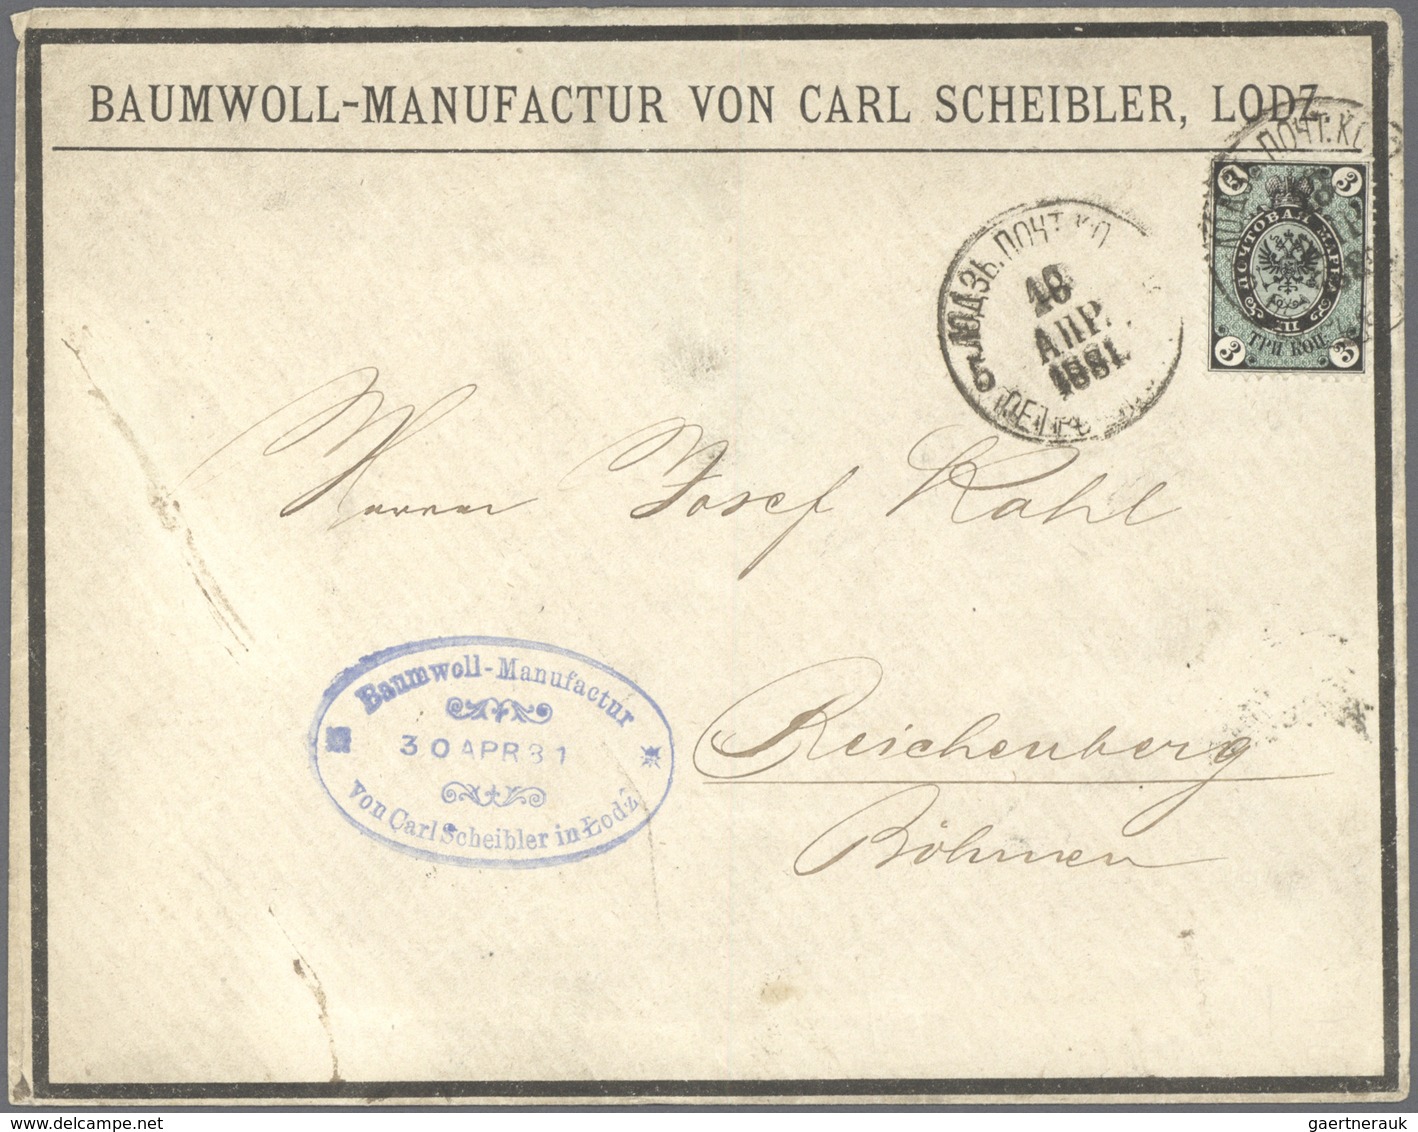 O/Brfst/Br Polen: 1854/1914 (ca.), Pre-independent Poland, collection of postmarks on Austria, Germany and espe